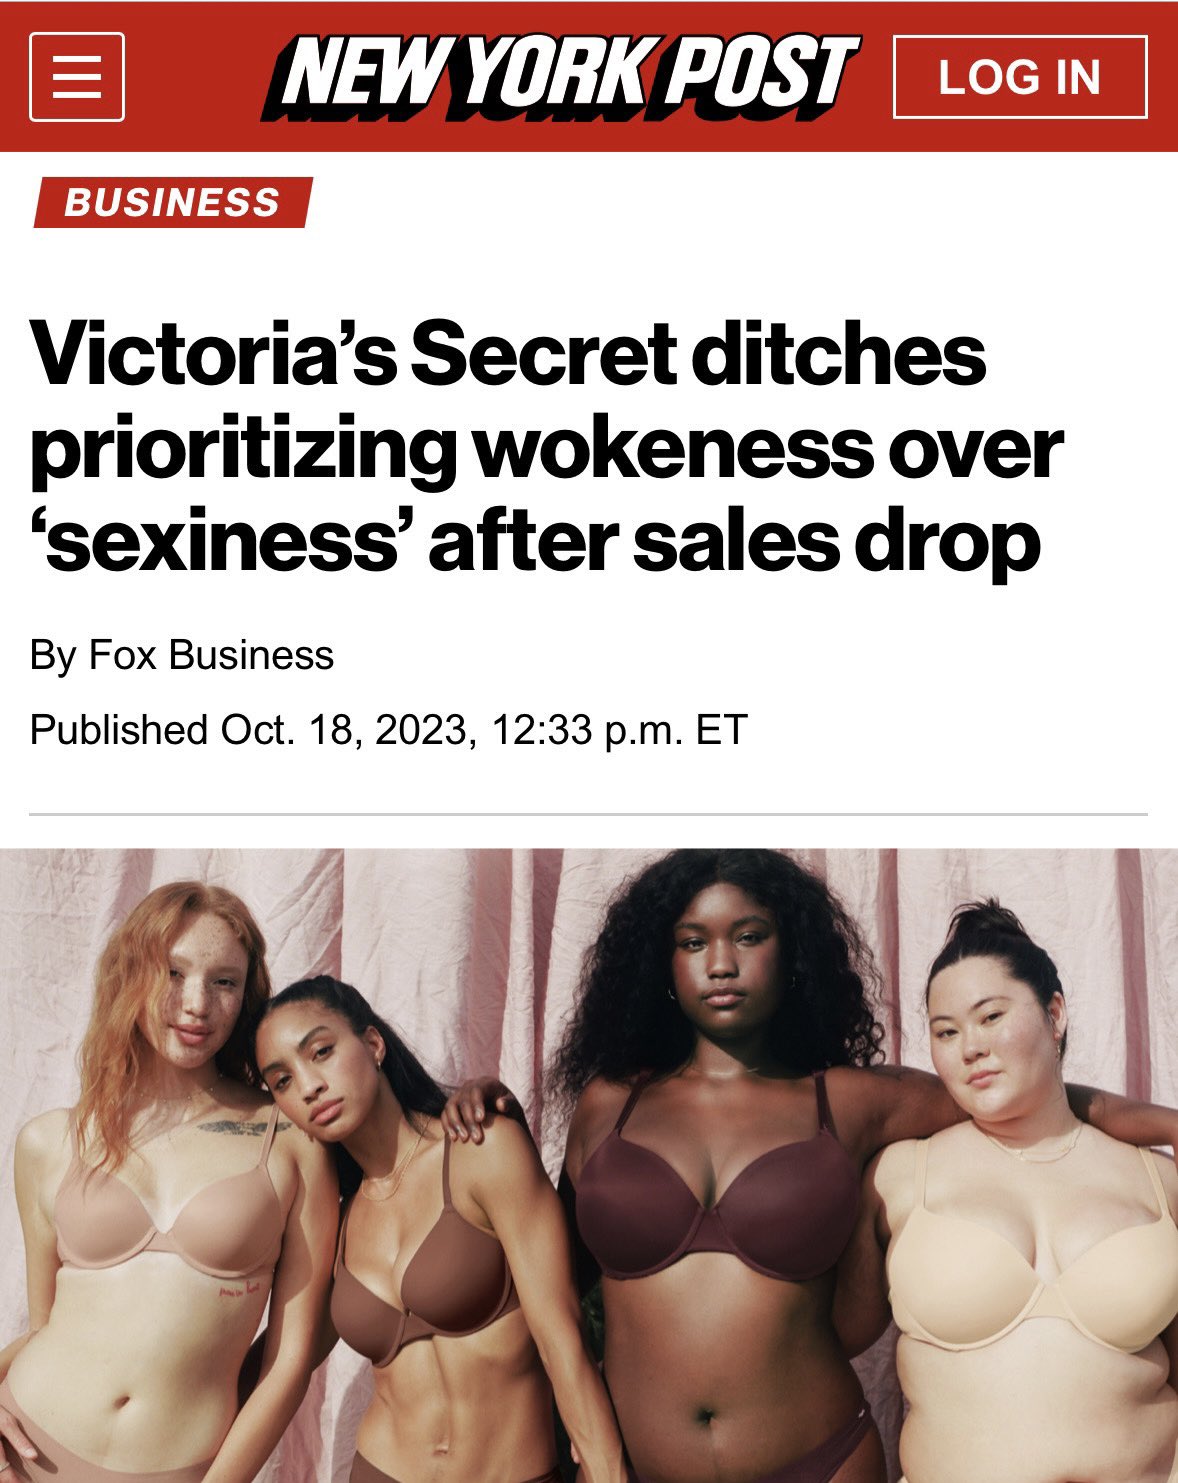 Victoria's Secret ditches prioritizing wokeness over 'sexiness